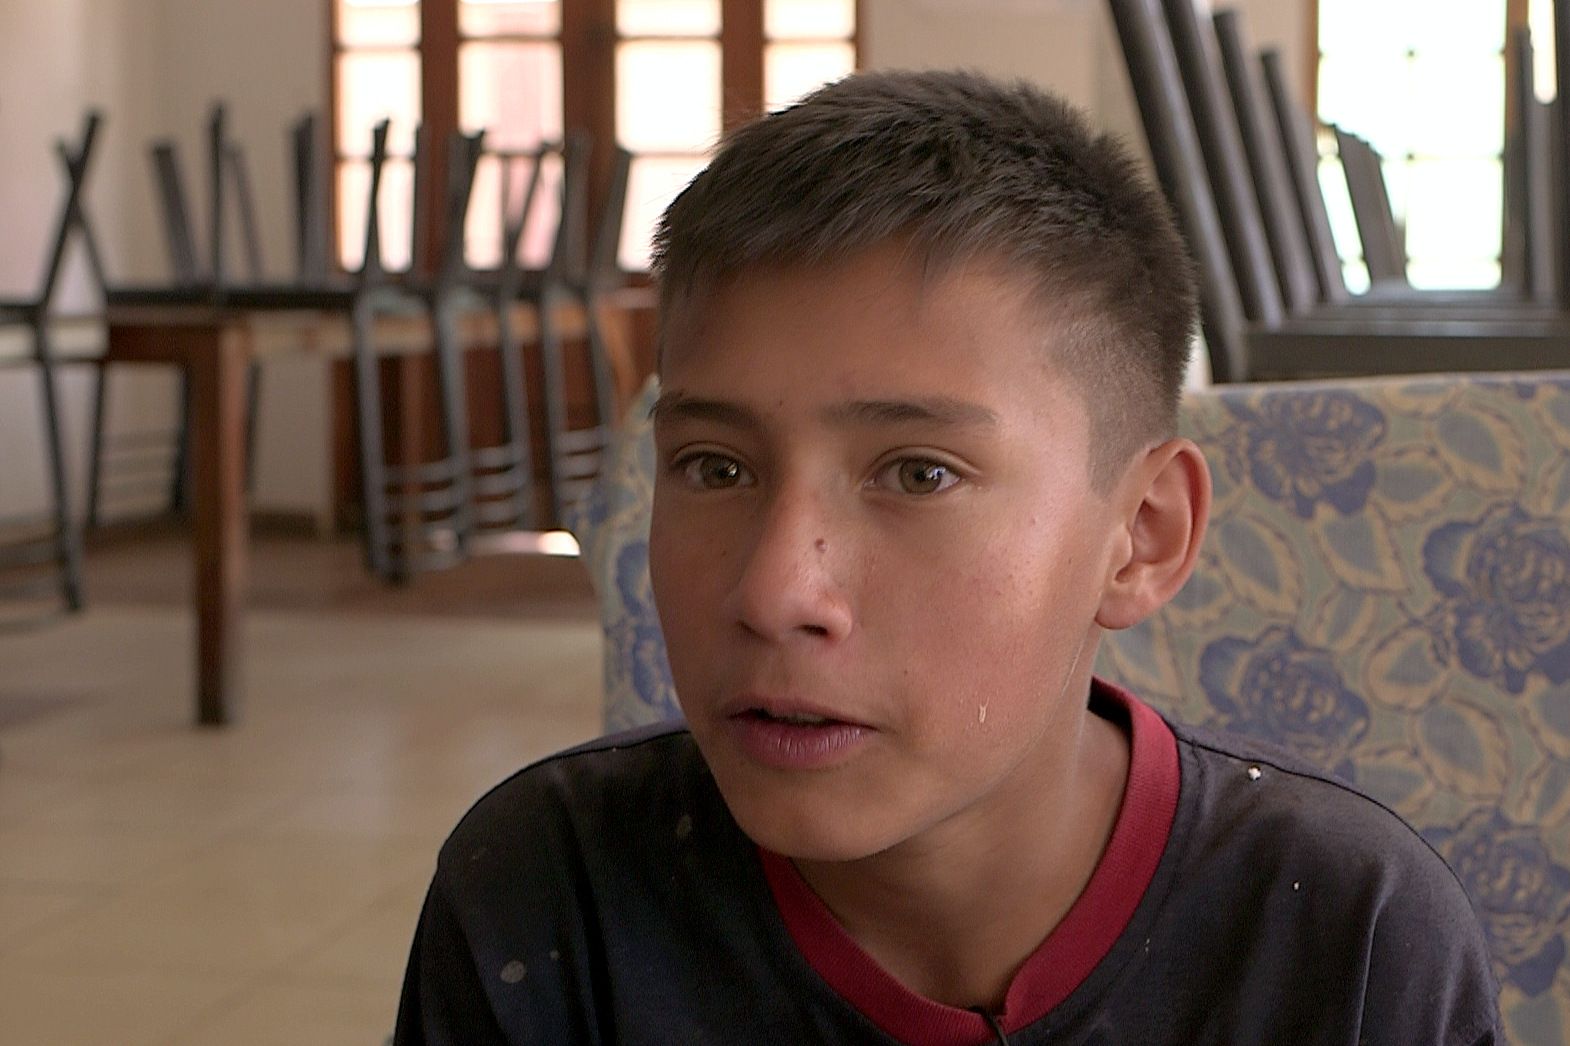 Natan Tobias, 13, said he was frightened after authorities brought him to an orphanage near Cochabamba. "I was afraid. I didn't even want to come out of my room." Image by Tracey Eaton. Bolivia, 2017.